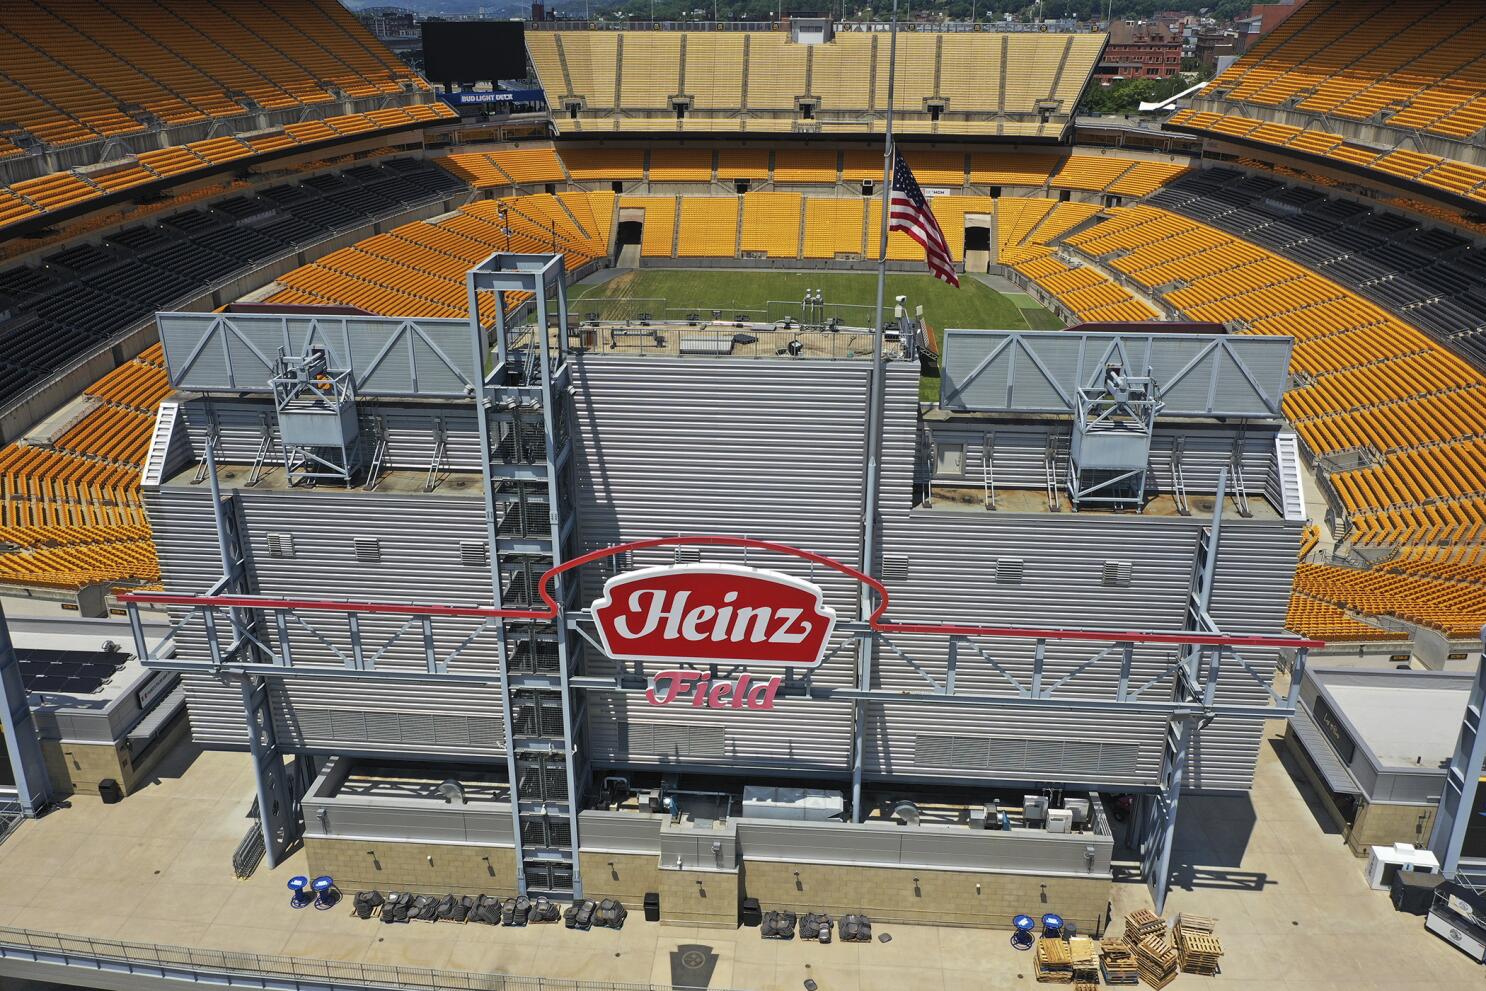 Heinz out, Acrisure in as Steelers' stadium sponsor - The San